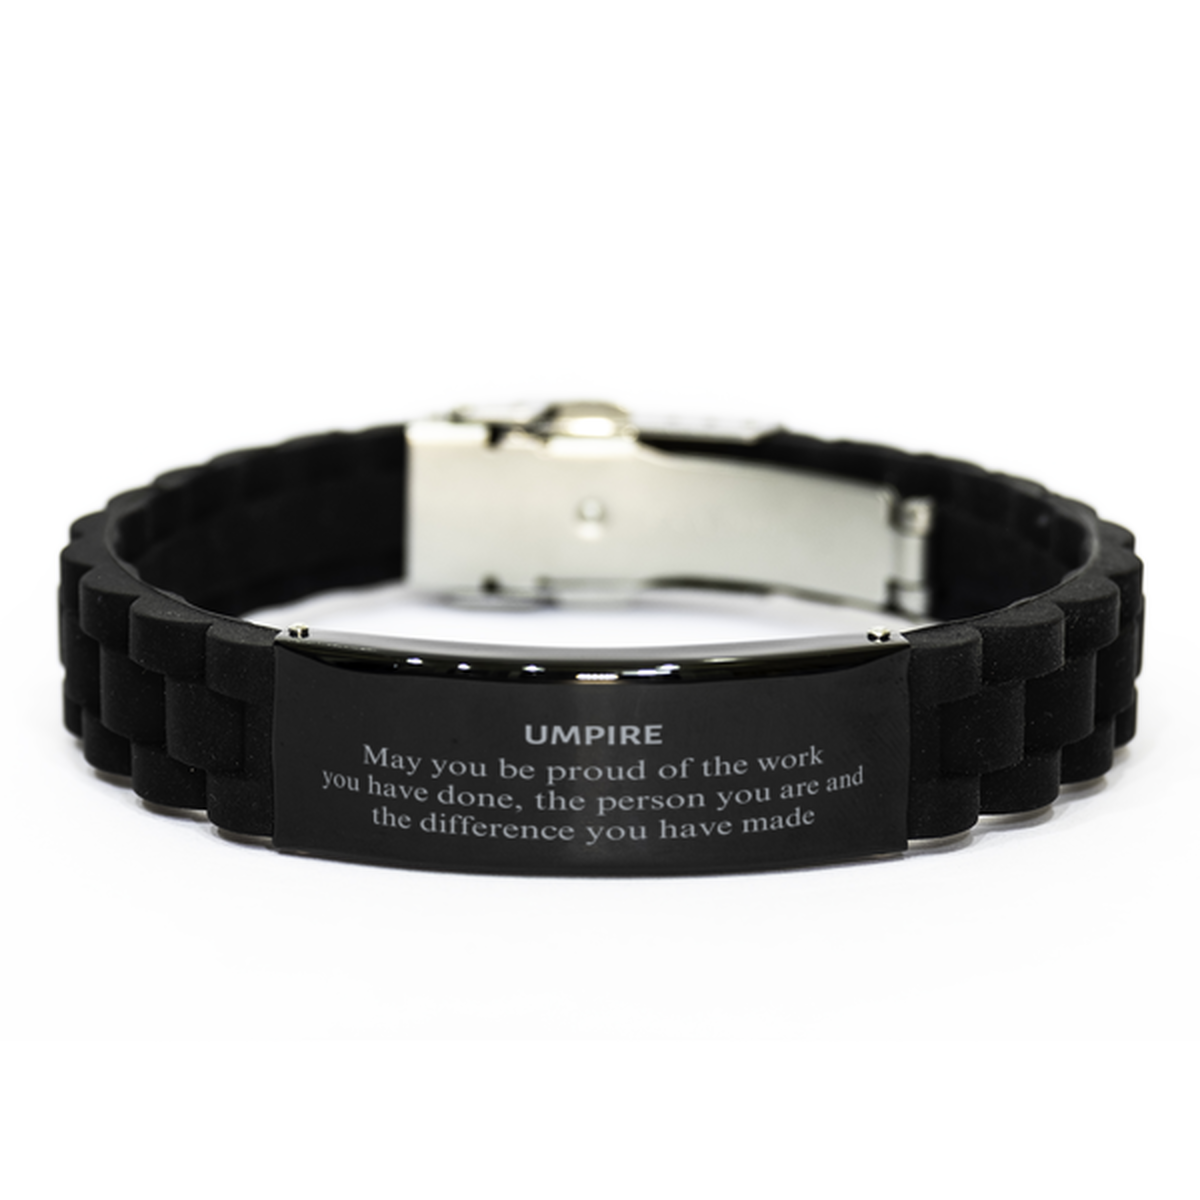 Umpire May you be proud of the work you have done, Retirement Umpire Black Glidelock Clasp Bracelet for Colleague Appreciation Gifts Amazing for Umpire